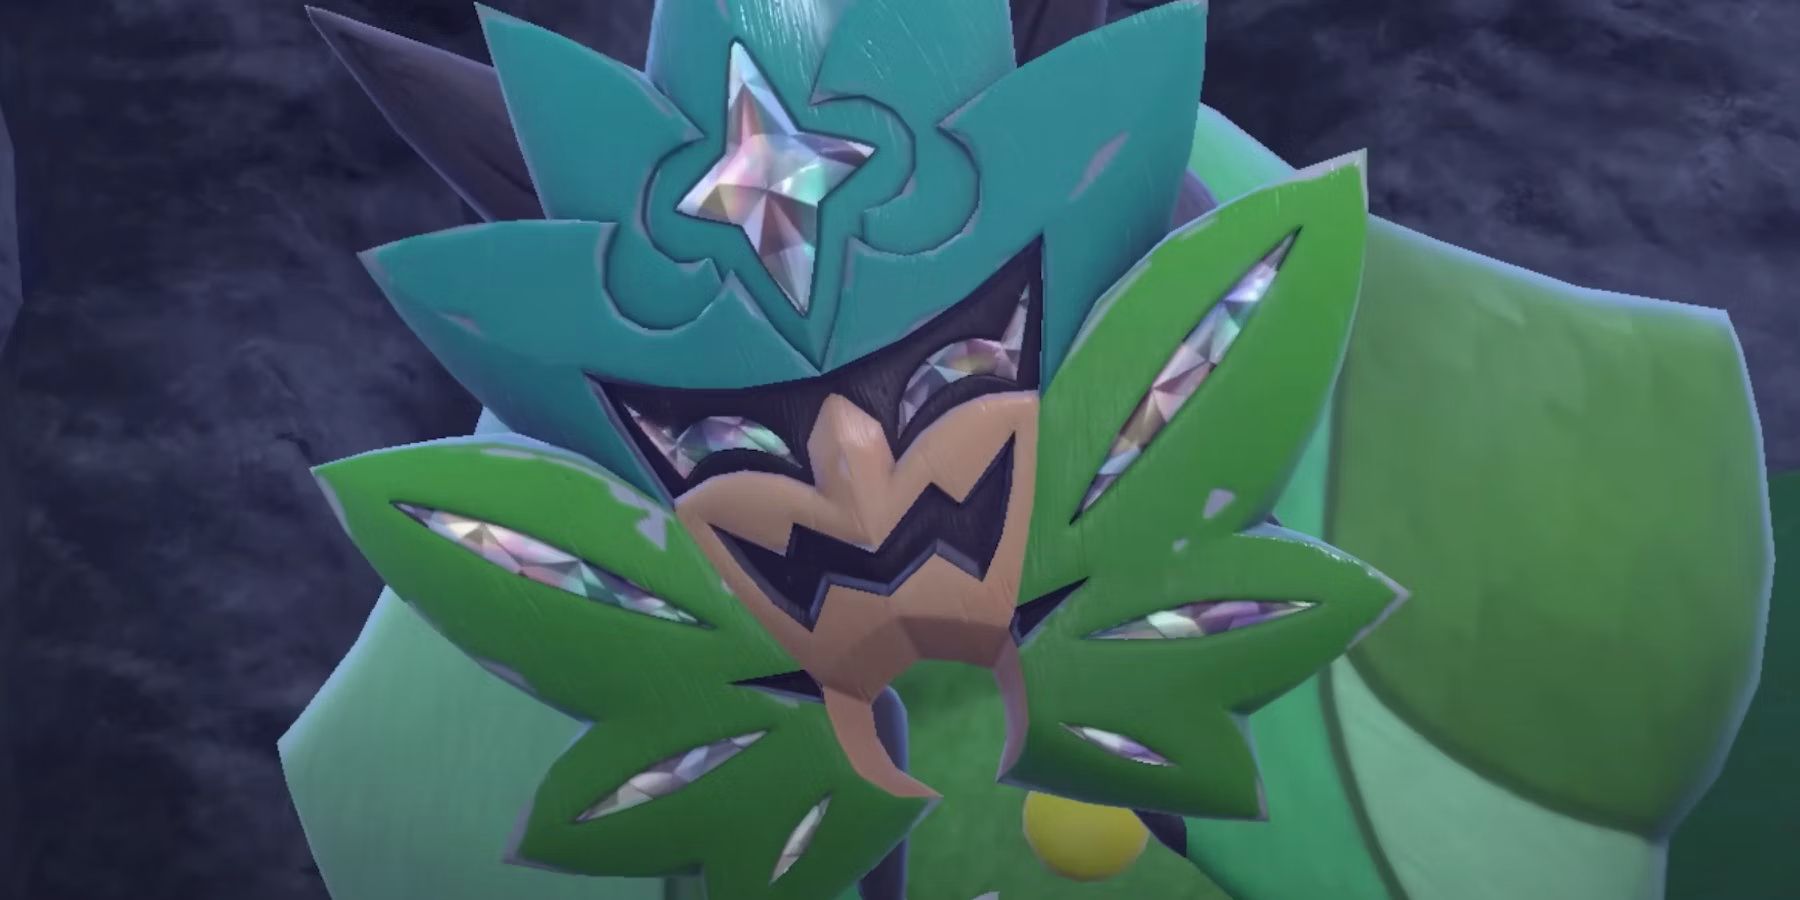 Ogrepon, the green humanoid Pokémon with the teal mask, glowers at the camera. In the background a hill at night.